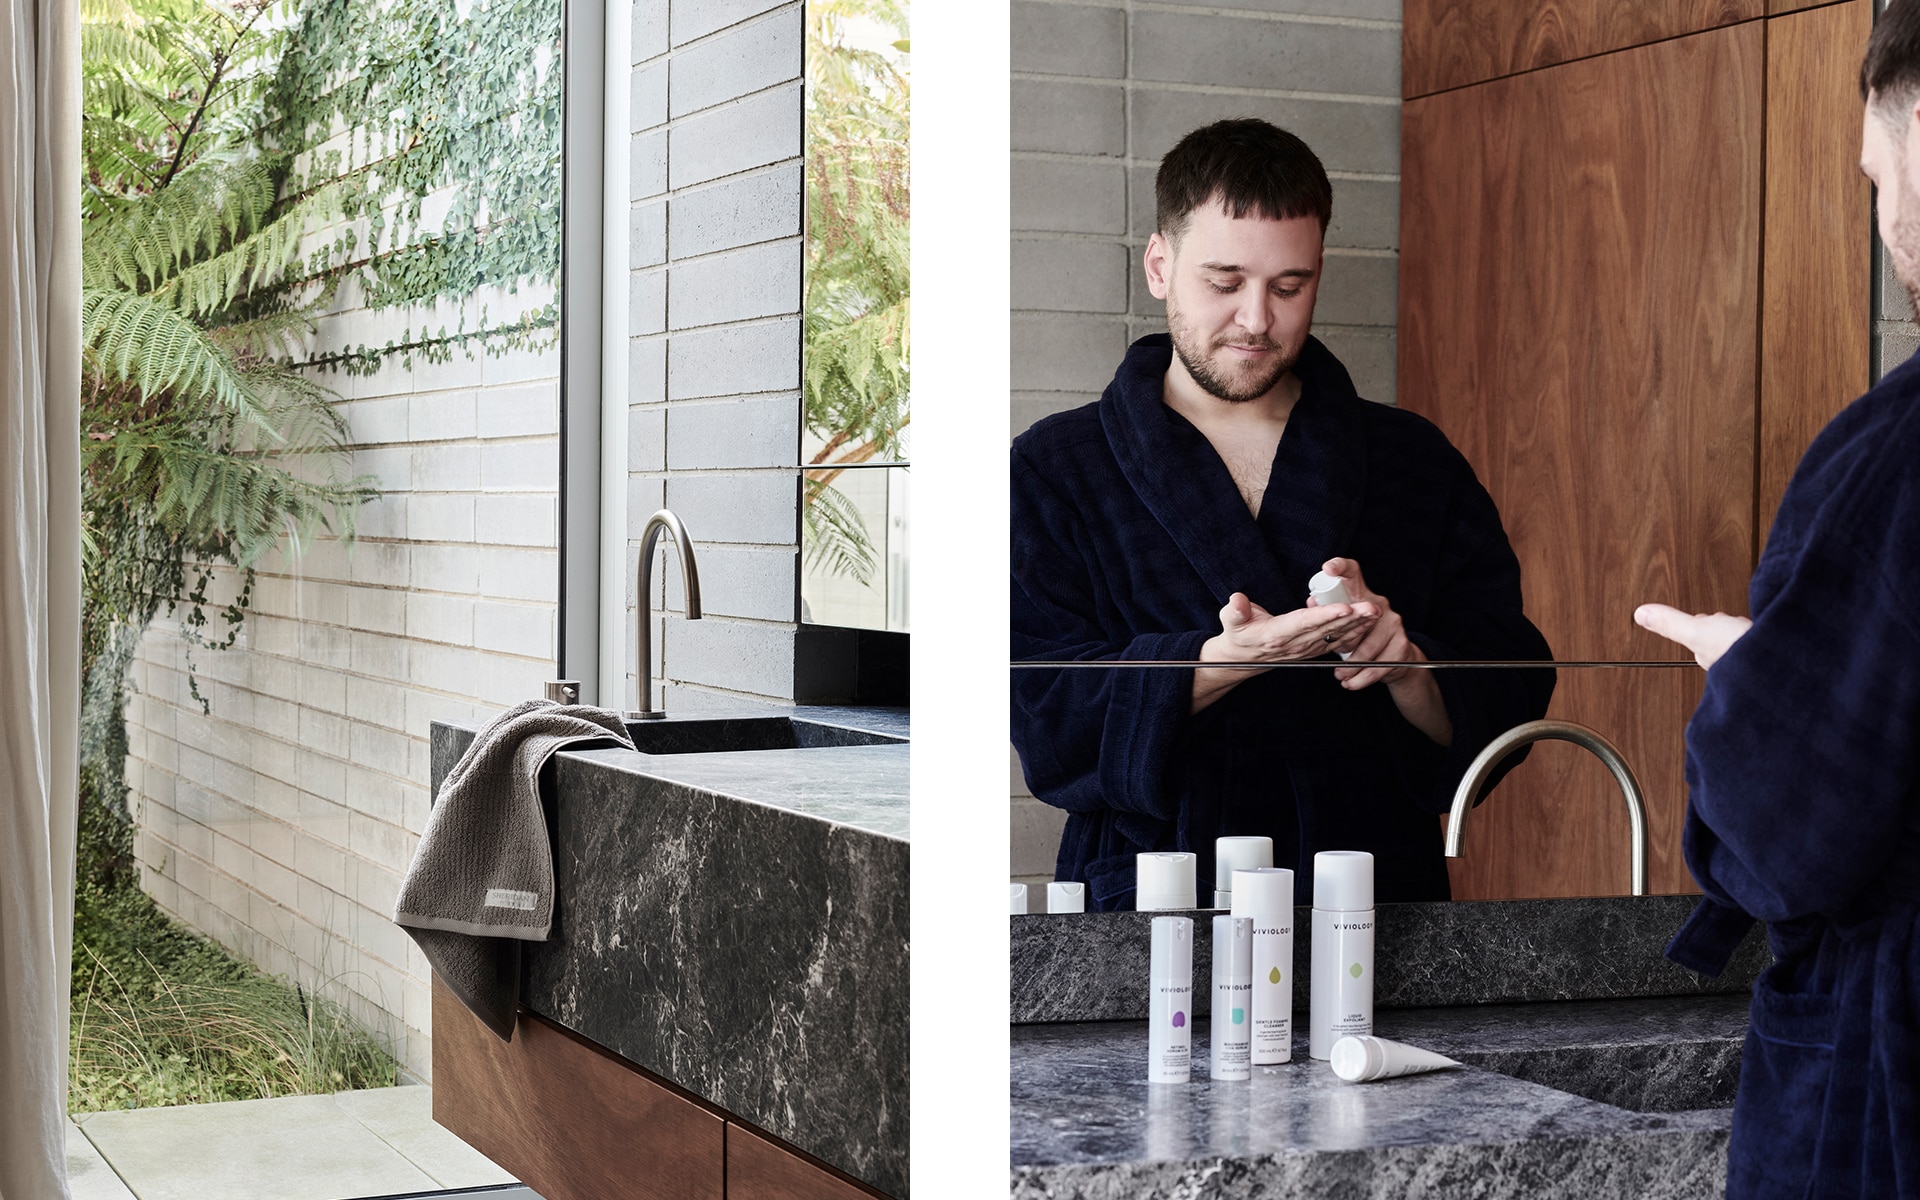 split image. right: shot of corner of bathroom countertop, with ash sheridan living textures towel. glass window shows palm fronds. right: james vivian wearing sheridan chiswick robe, applying viviology skincare in mirror.